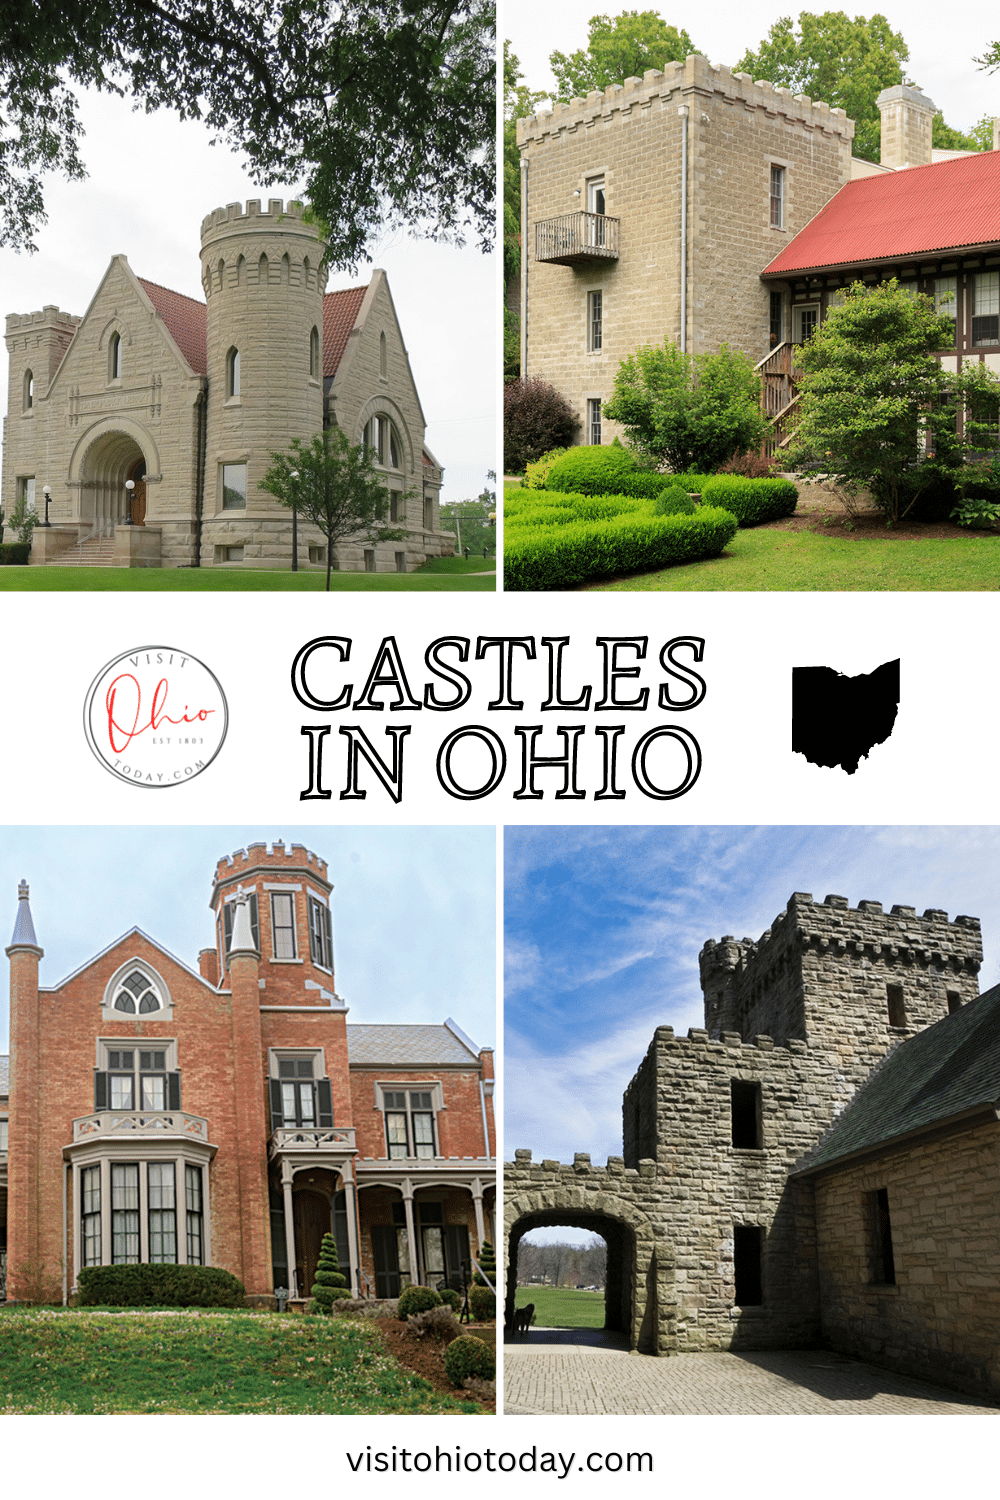 There are at least 16 castles in Ohio, some of which are open to the public for visiting, some are museums, others are hotels or inns, and some are privately owned. Take a historical tour around the castles in Ohio!